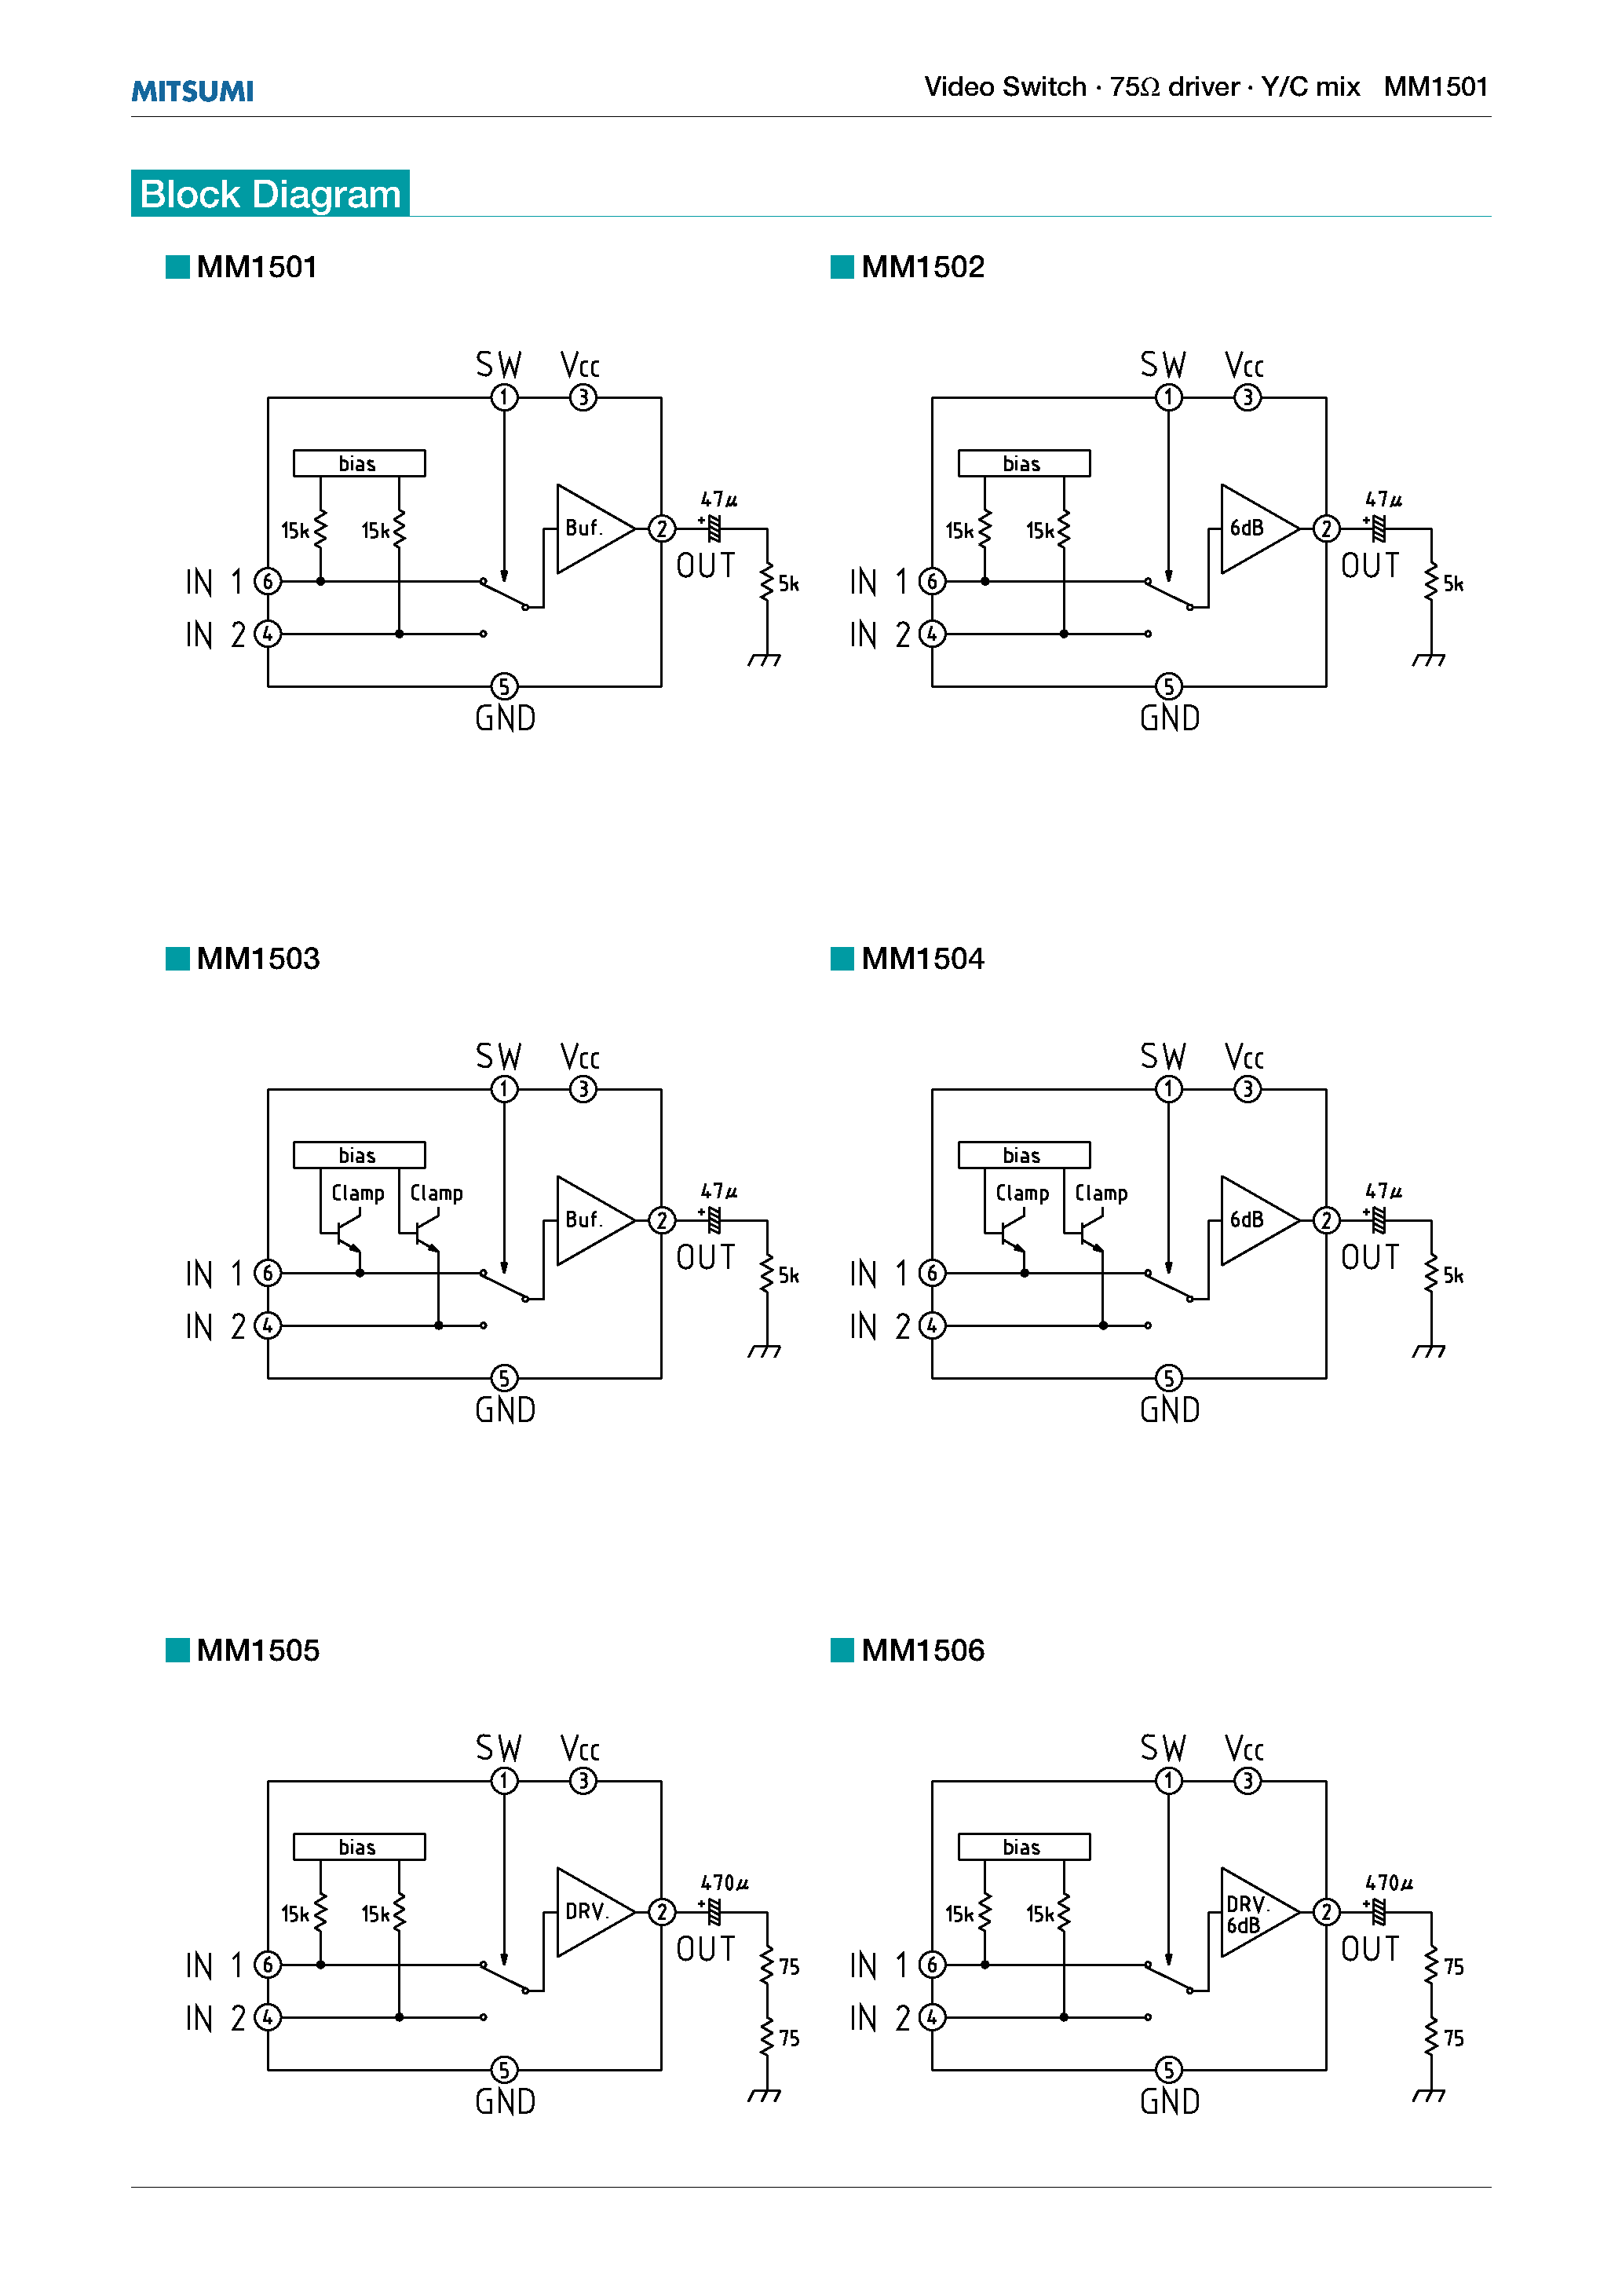 Datasheet MM1507 - Video Switch 75 driver Y/C mix page 2